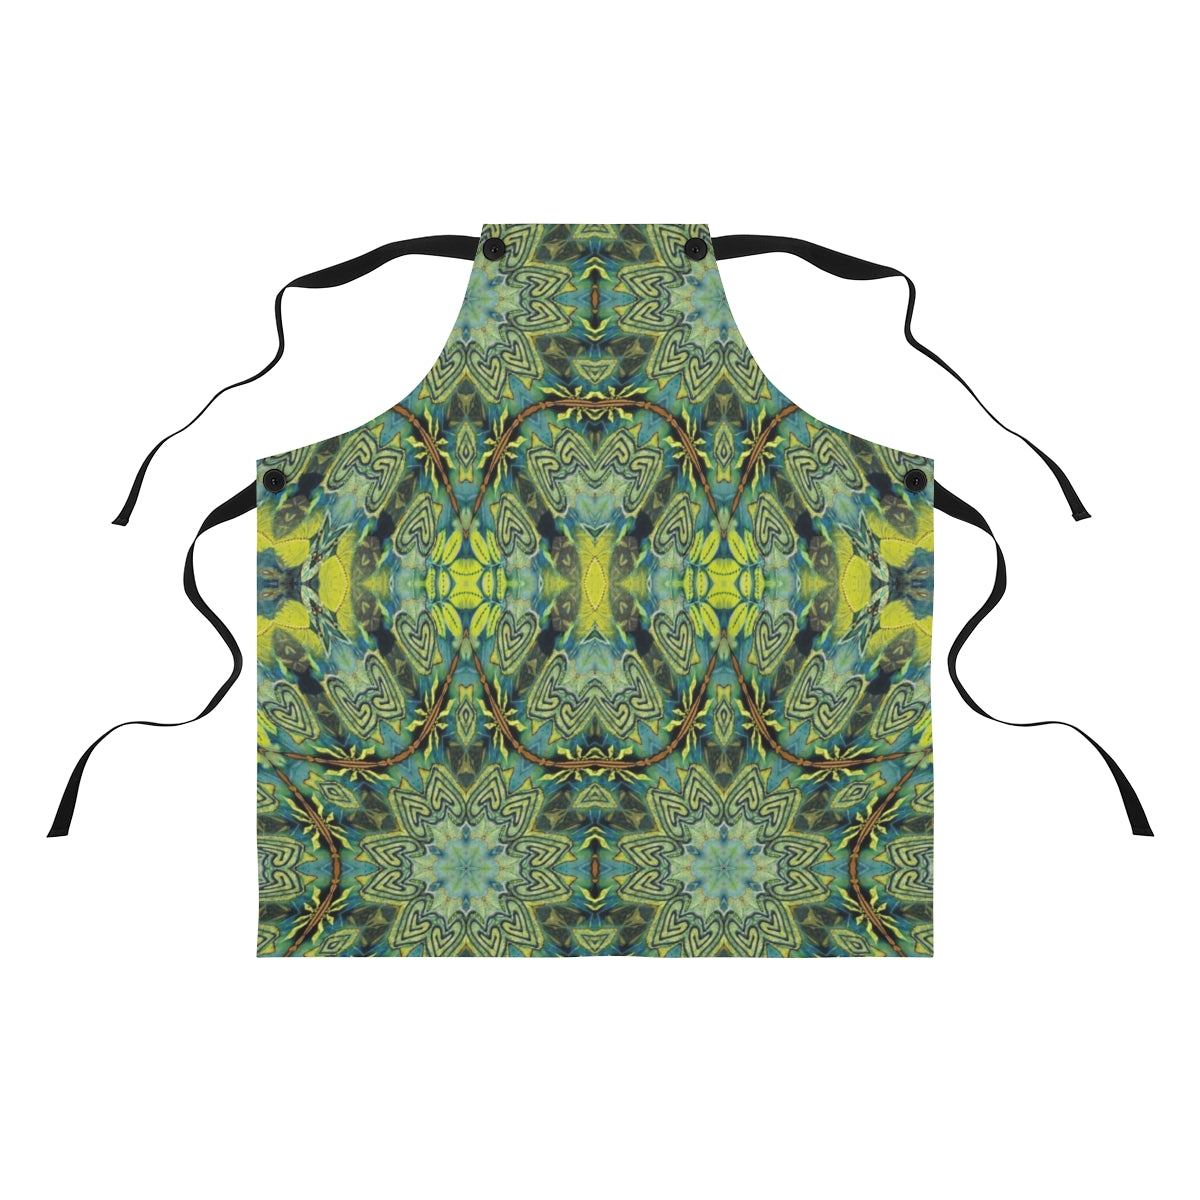 designer apron with a blue green motif printed on it